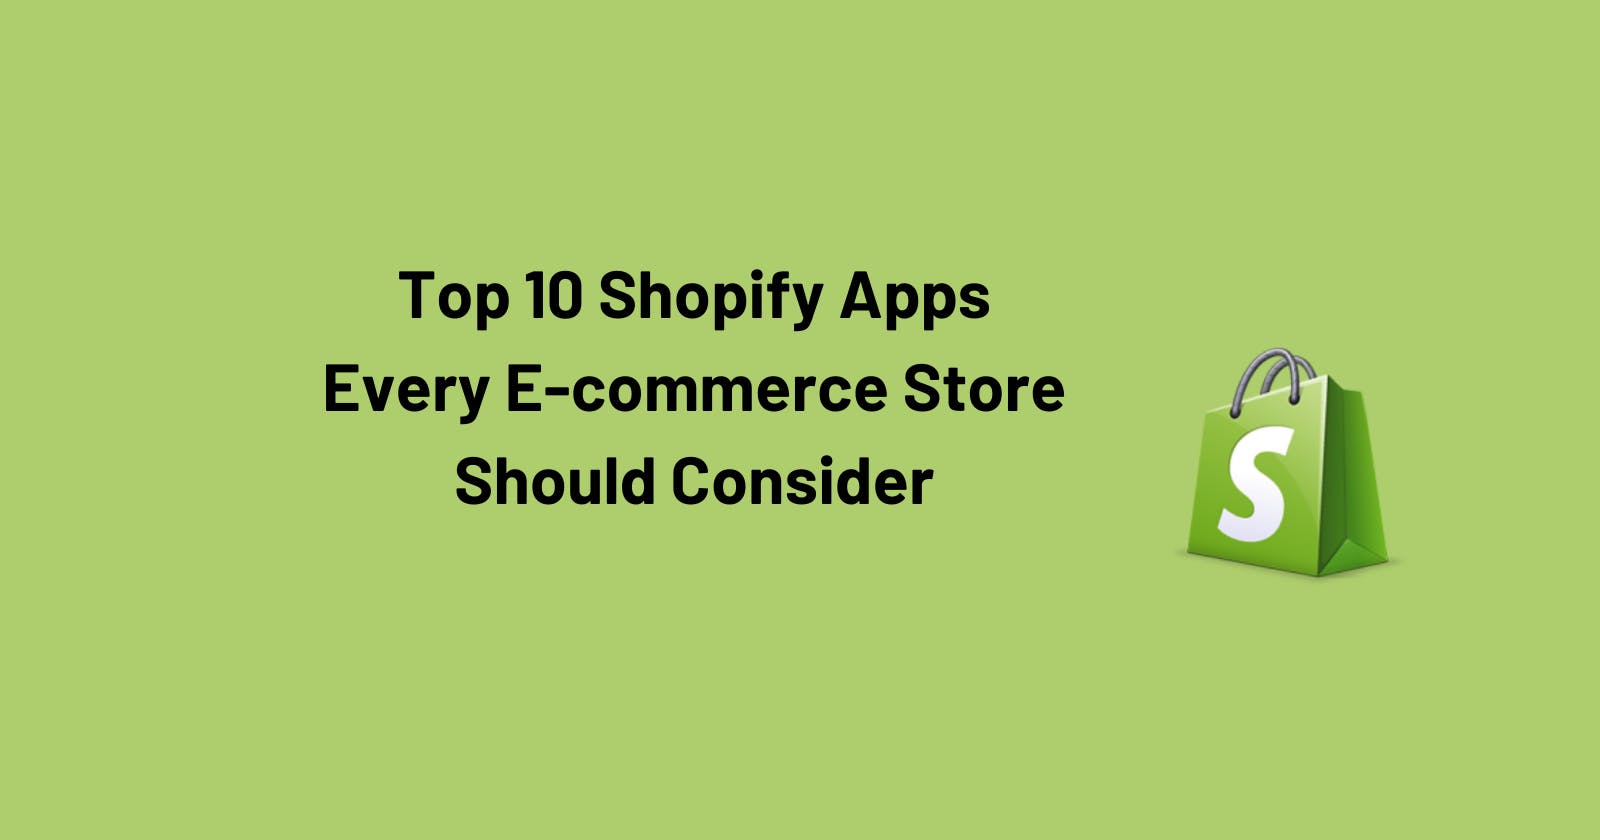 Top 10 Shopify Apps Every E-commerce Store Should Consider